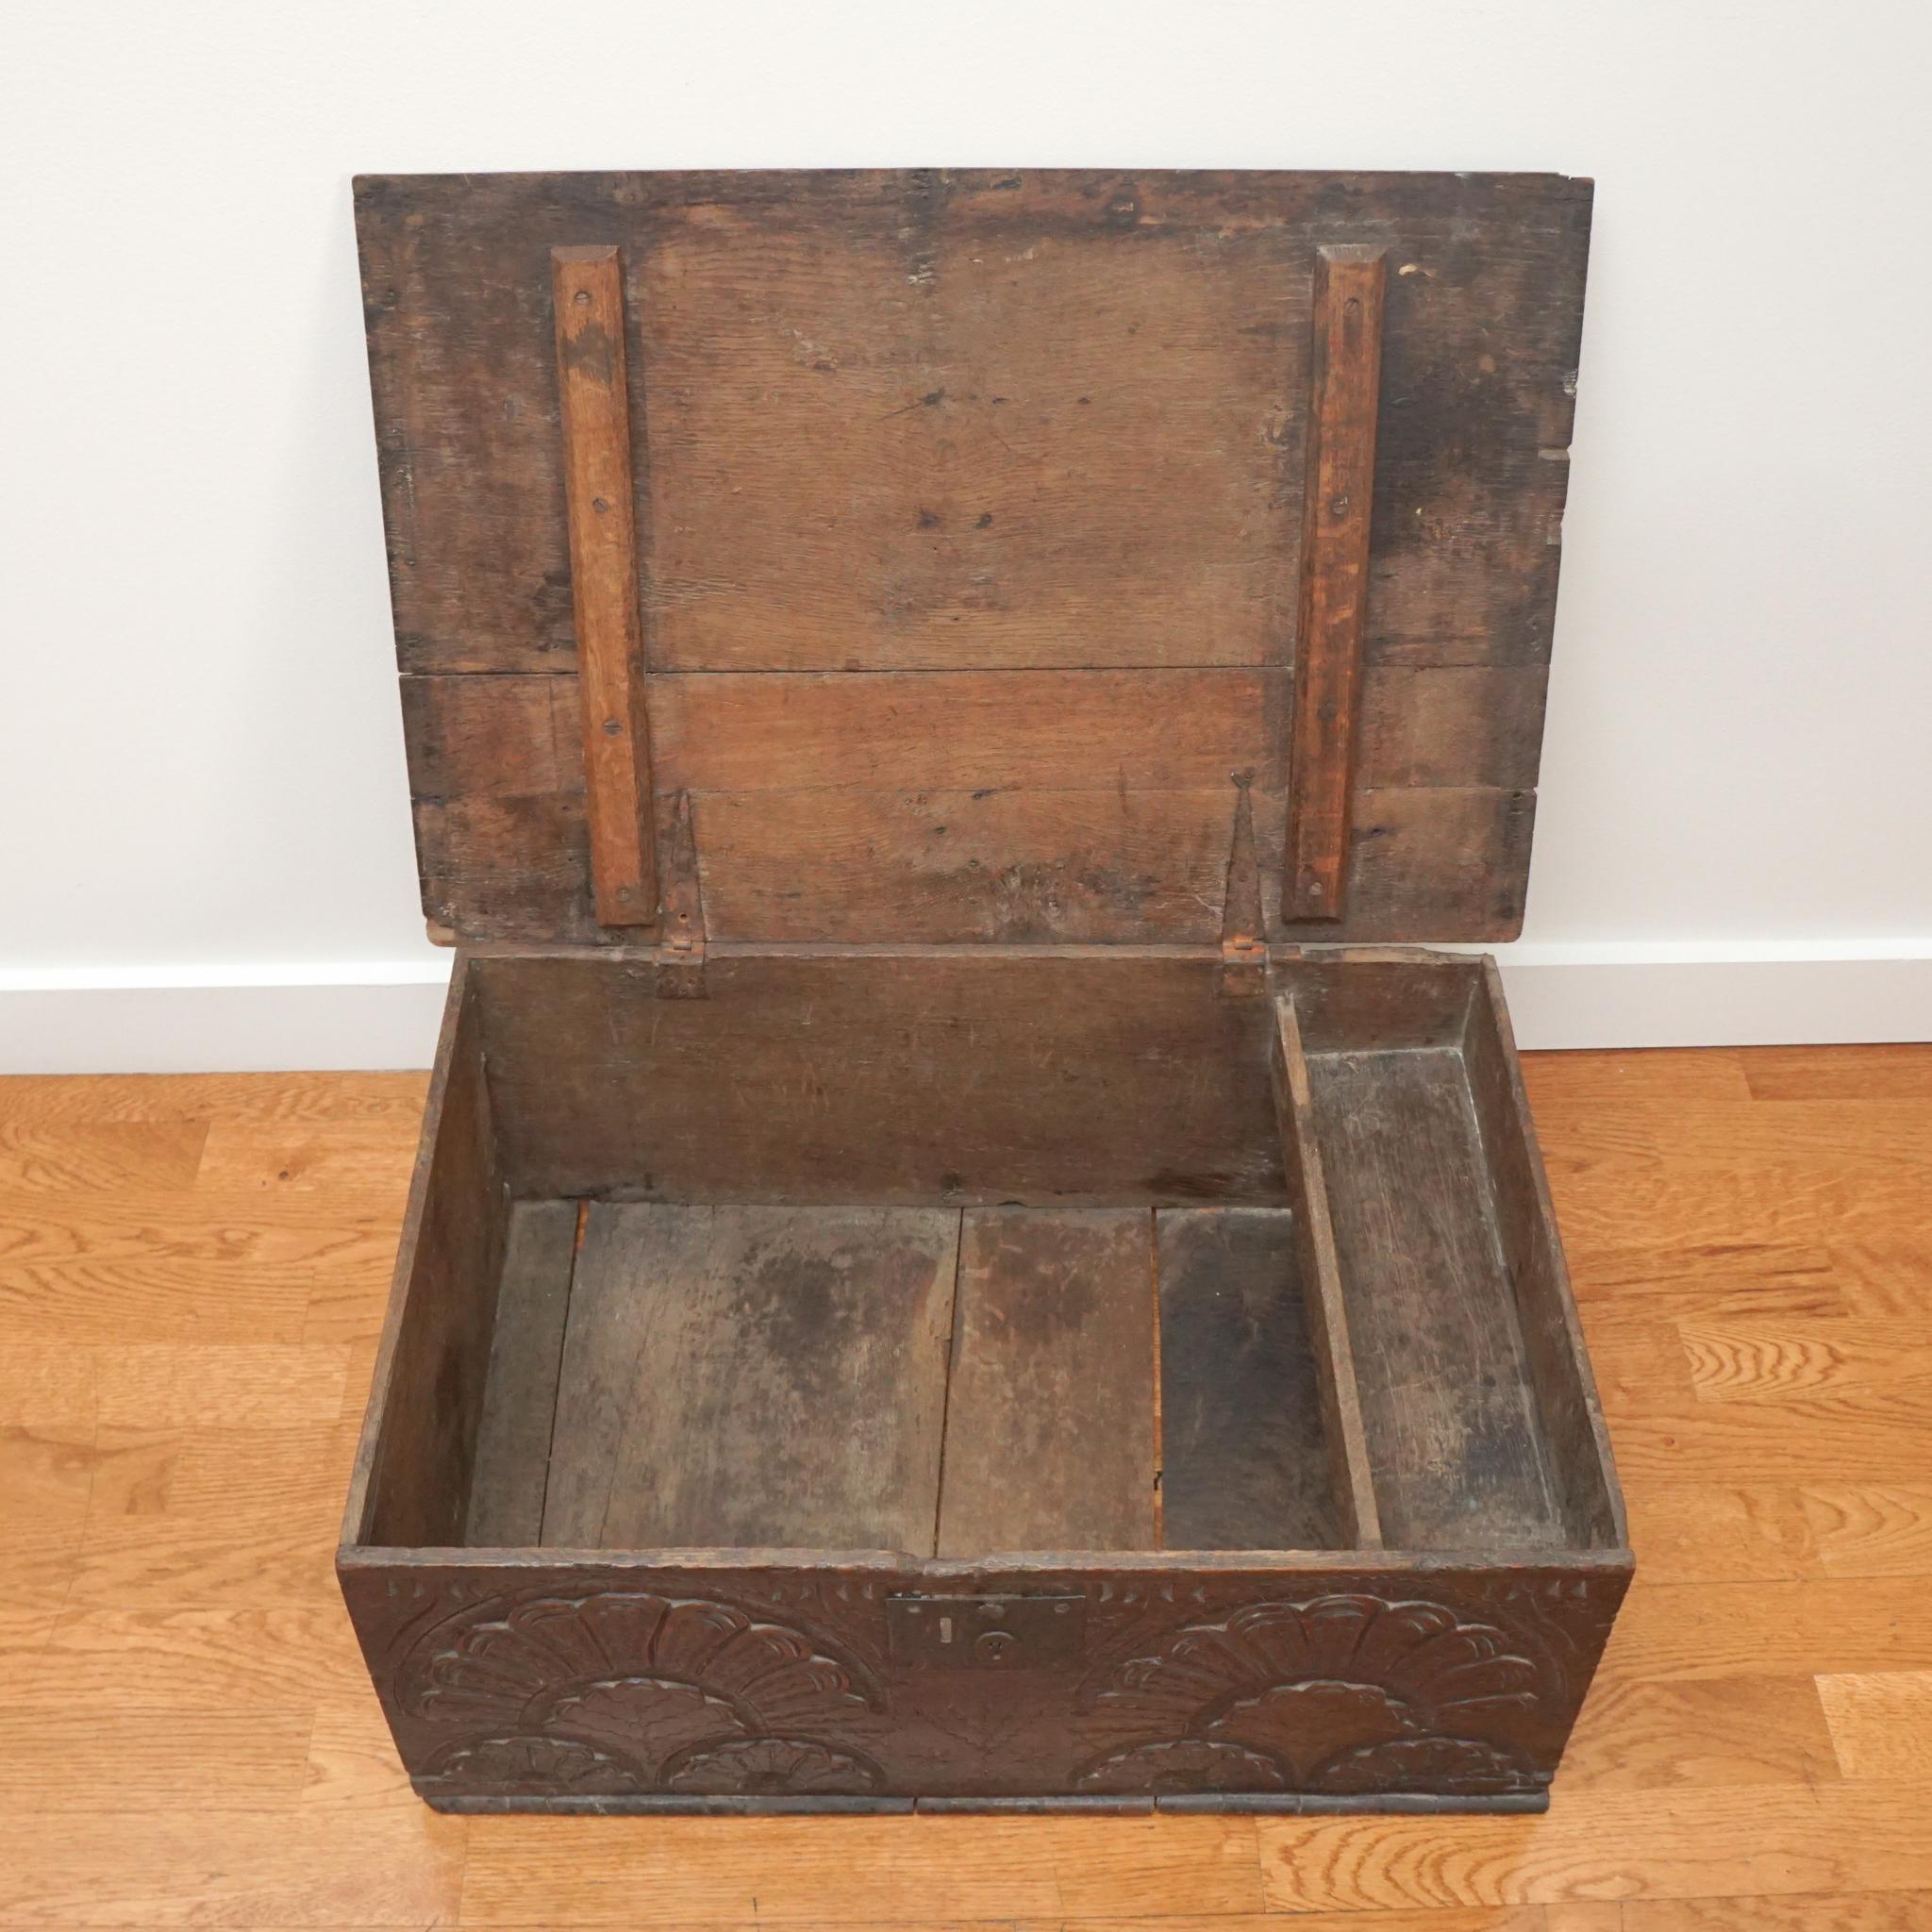 18th century oak carved bible box. Intricate design, original hardware and still in good condition considering its age.